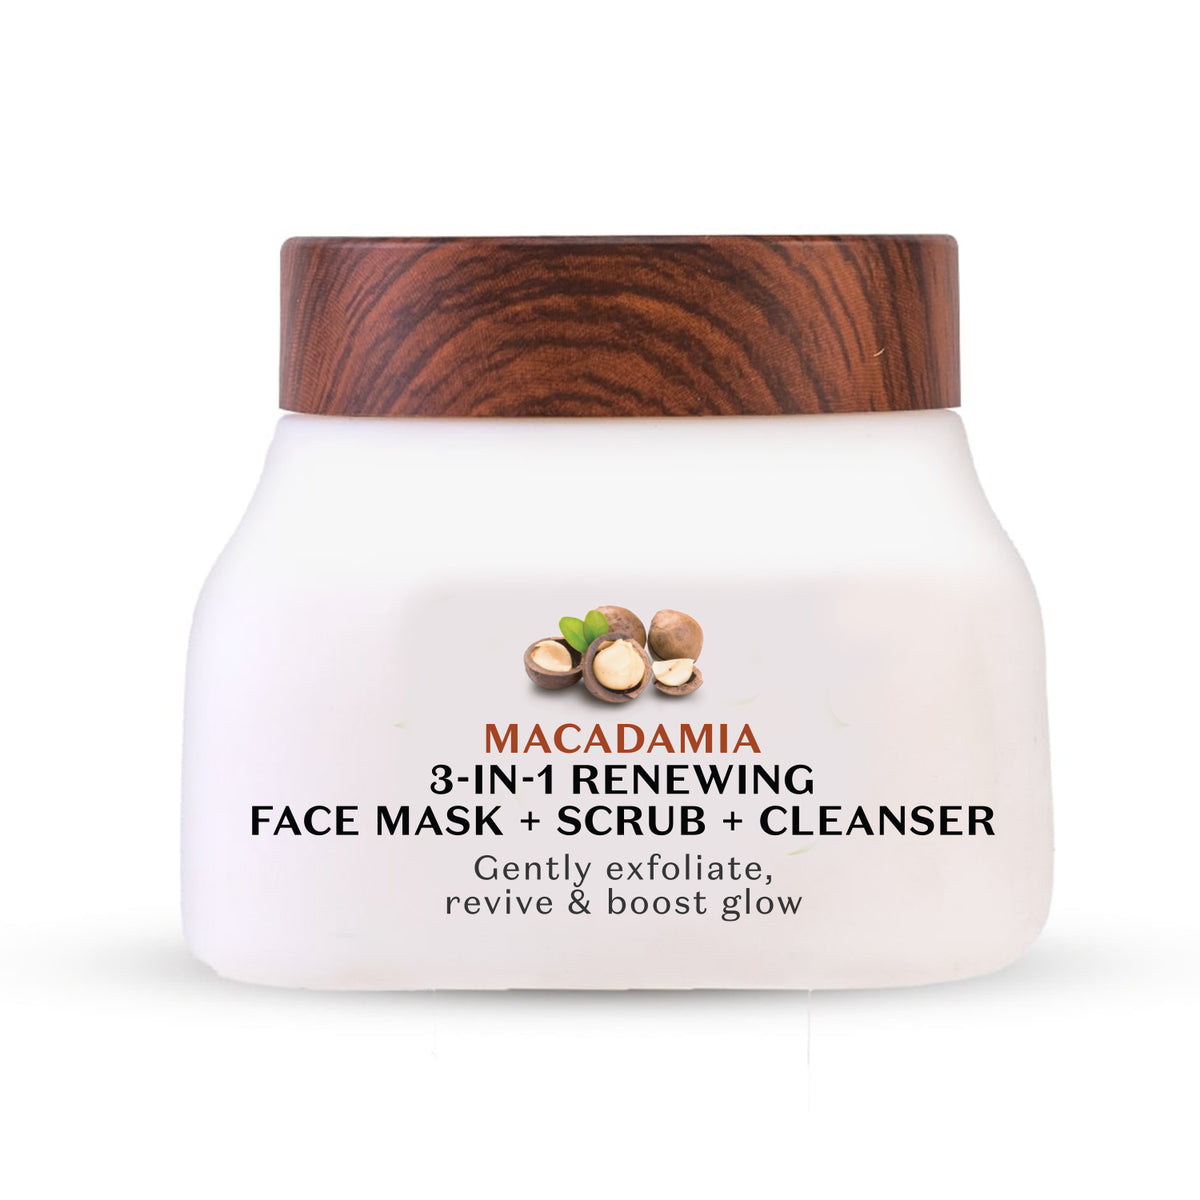 Macadamia 3 in 1 Renewing Face Mask, Scrub & Cleanser | From the makers of Parachute Advansed | 140ml - PureSense